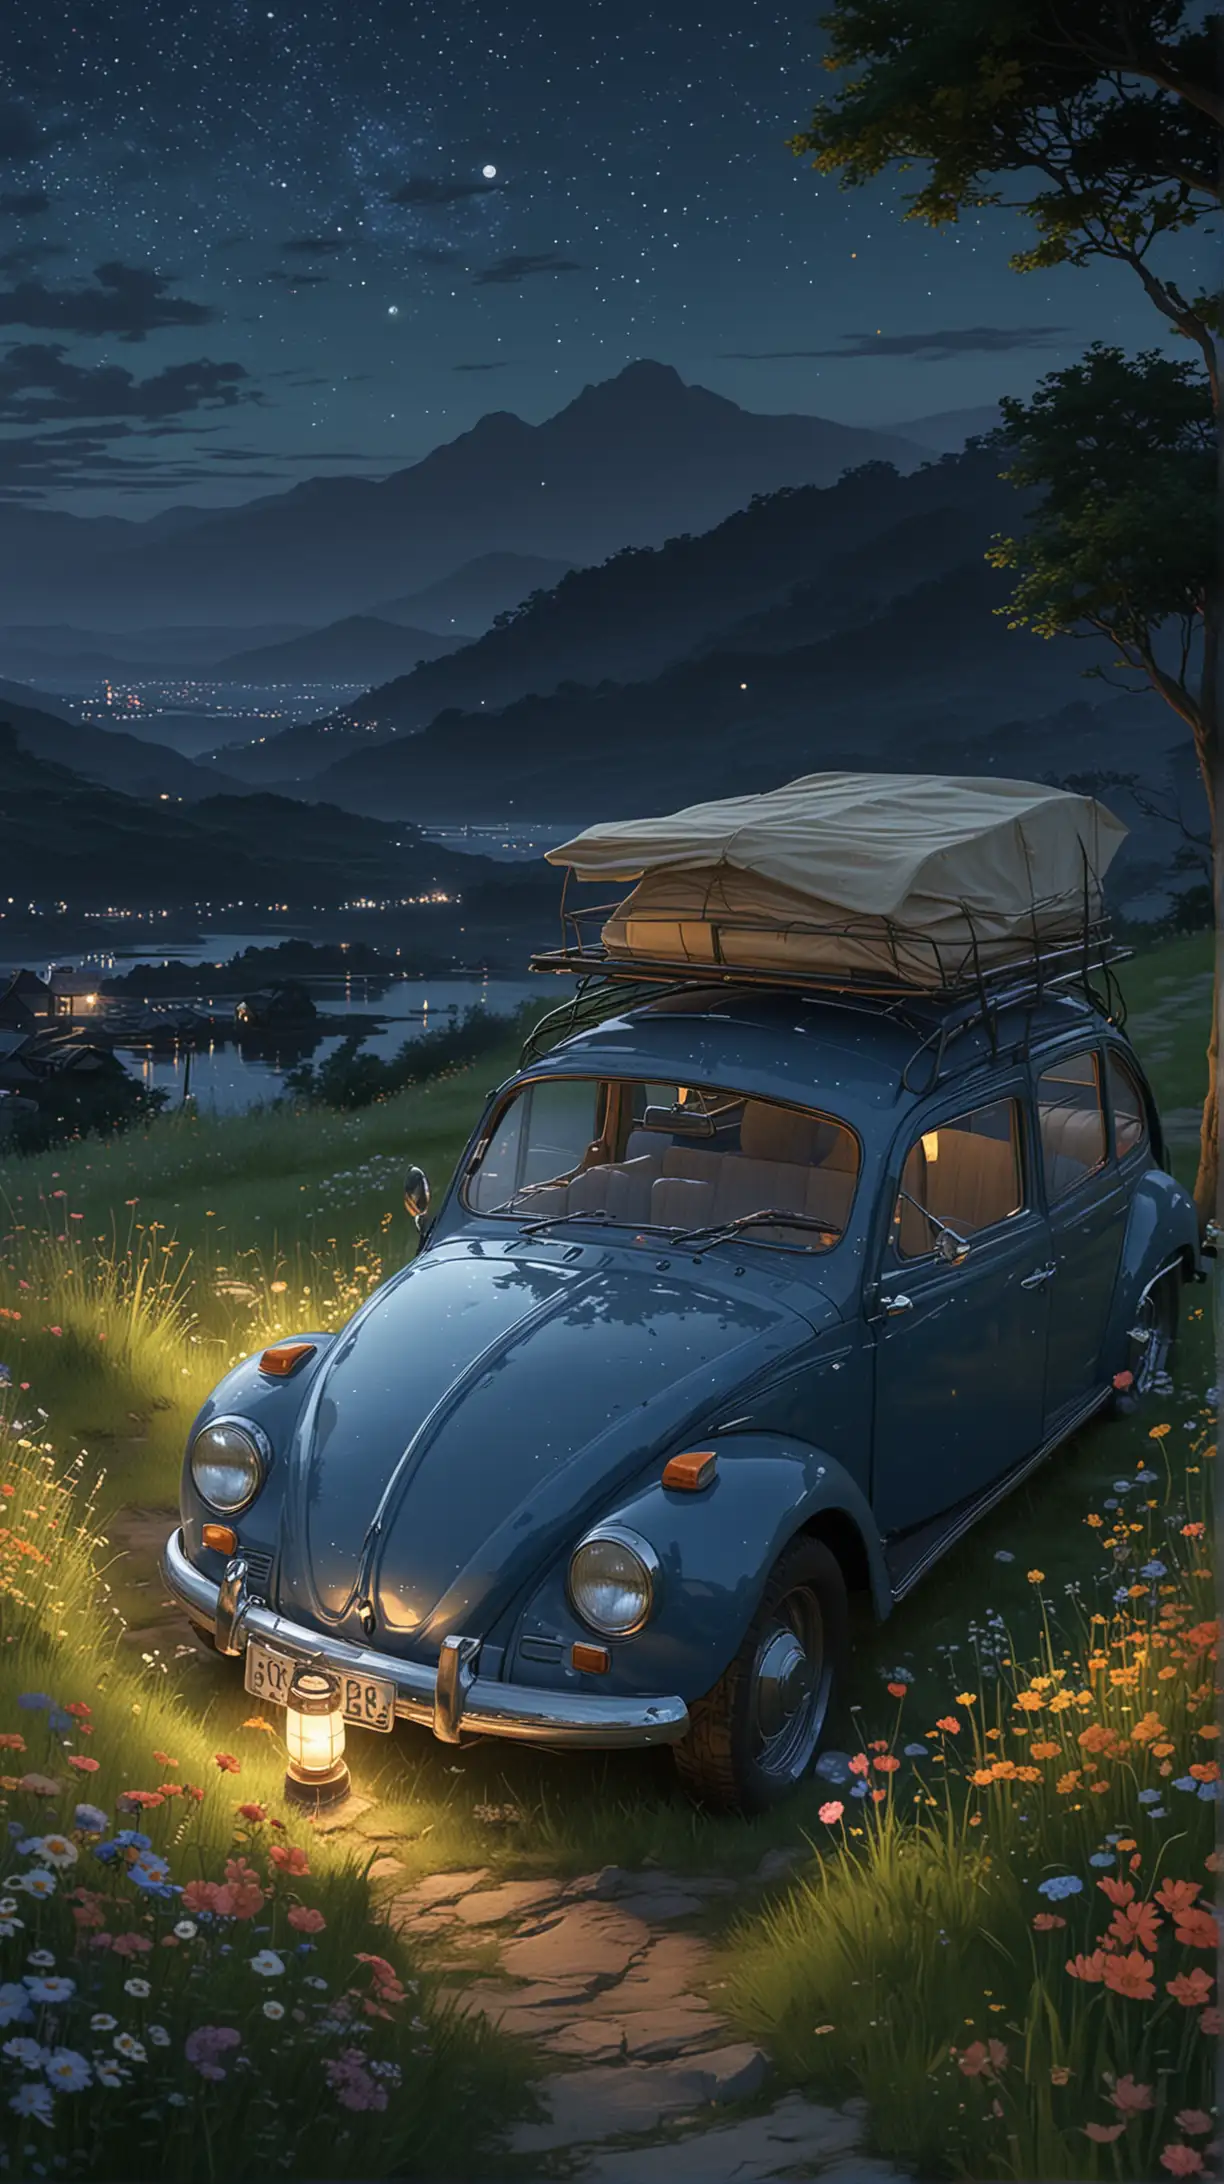  a boy and a girl standing on roof of one VW car parked on hill under beautiful dark night starry sky , a tent build on the grass beside the car, lantern flickering, fireflies flying around,
, vibrant of variant flowers meadow, ultra detailed, high resolution, best composition, illustration, acrylic palette knife, makoto shinkai style, Codex_401 style, mystical, Mystica_meta style, ghibli vibes, ultra detailed, render, stable diffusion, trending pixiv fanbox, --ar MJ V 6.0 , 

